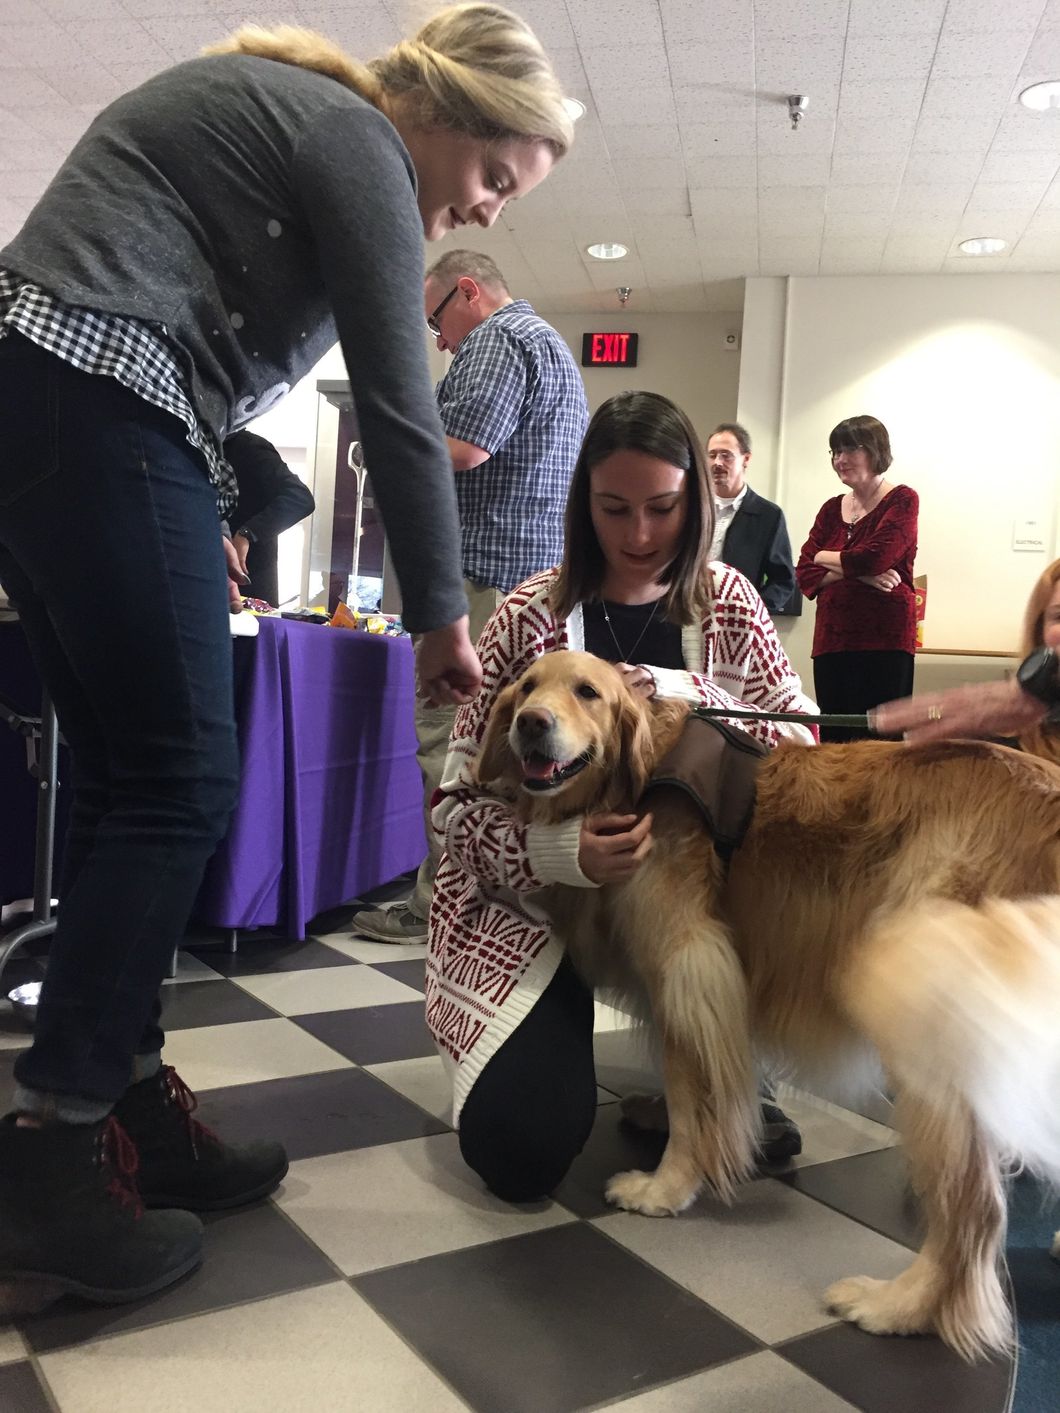 To Make Finals Week A Little Less Ruff, ECU Brings Students Joy In The Form Of Four-Legged Paws